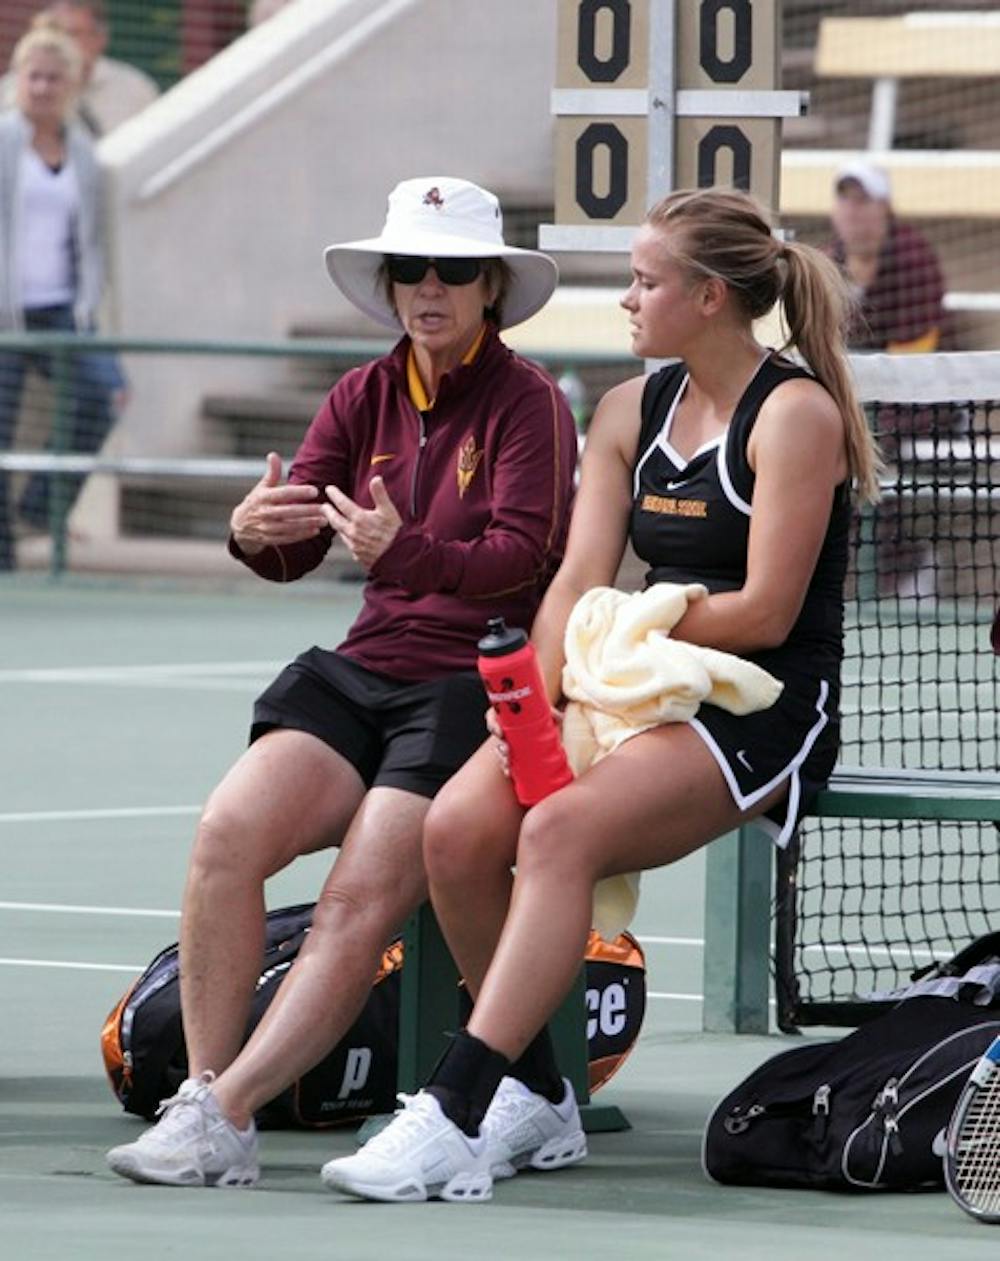 Coach Sheila McInerney talks to Michelle Brycki in between matches at the ASU Thunderbird Invitational on Nov. 4, 2011. Brycki is one of two seniors on the team that has learned to become a better leader under McInerney. (Photo by Beth Easterbrook)